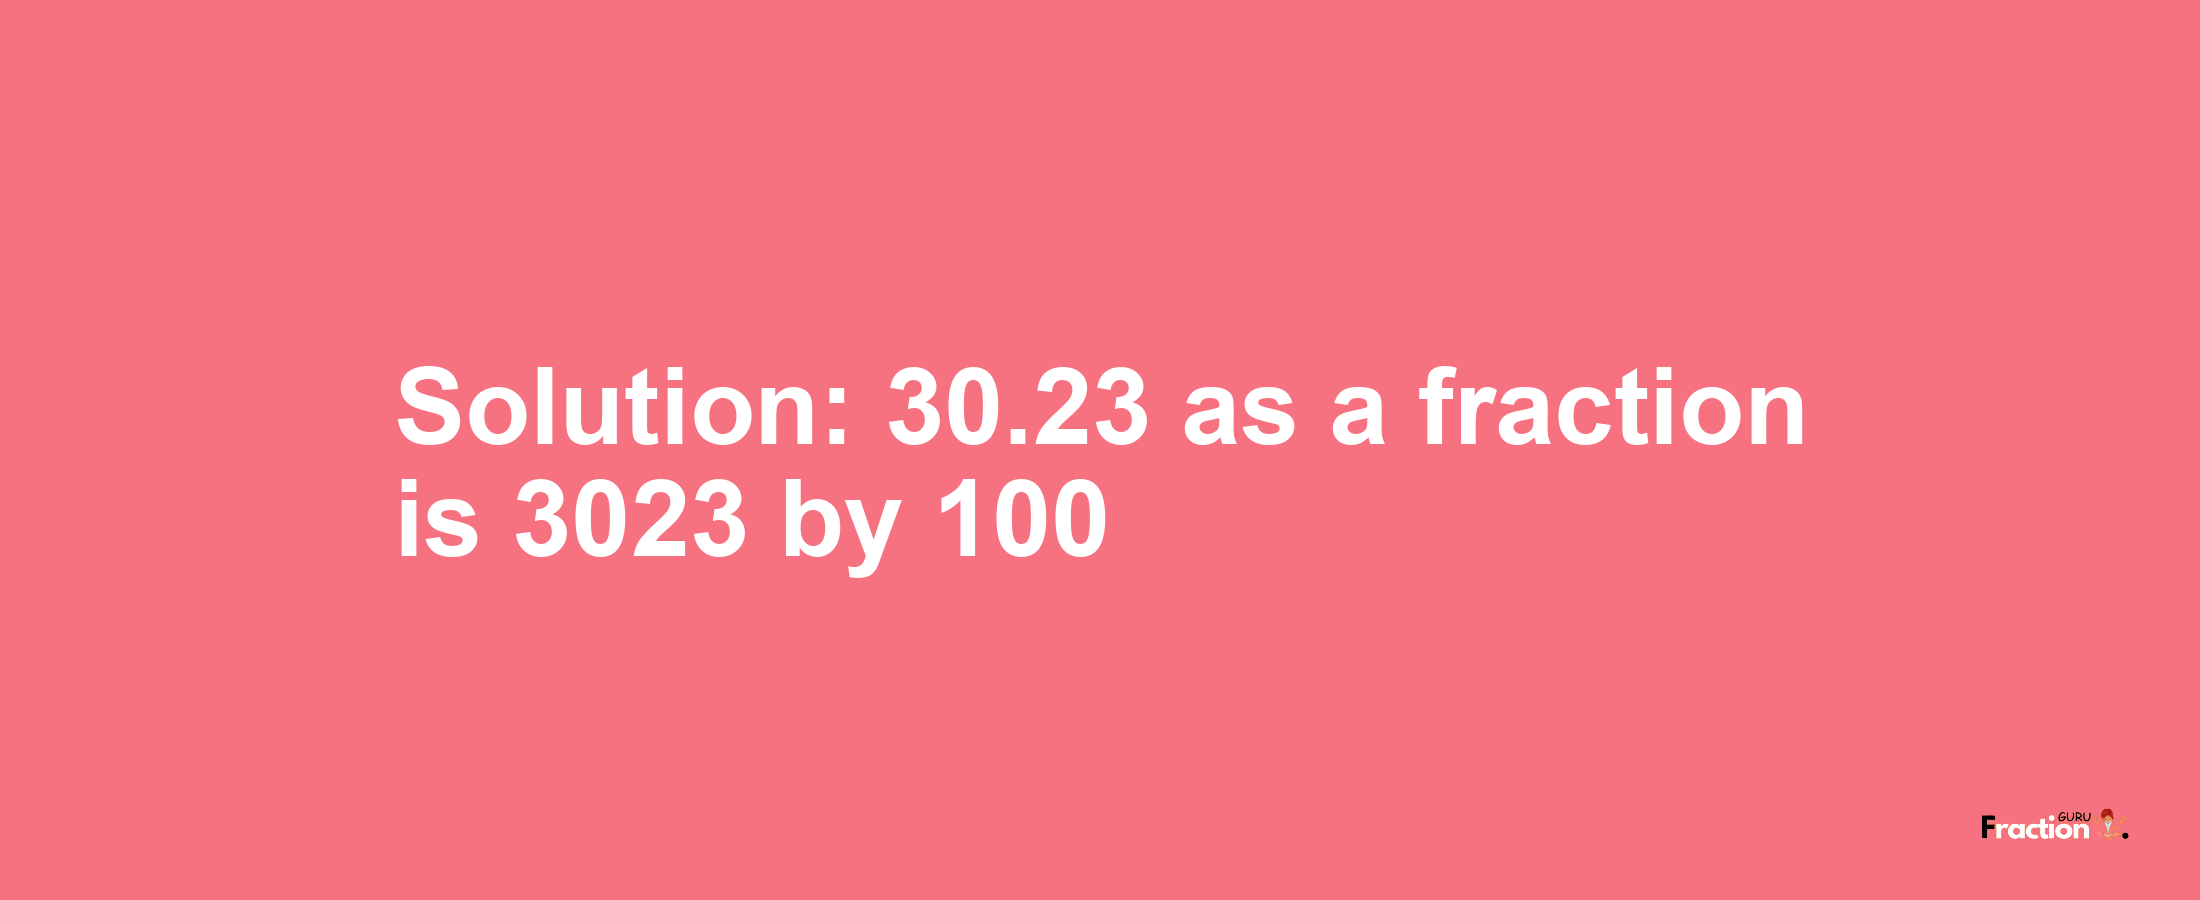 Solution:30.23 as a fraction is 3023/100